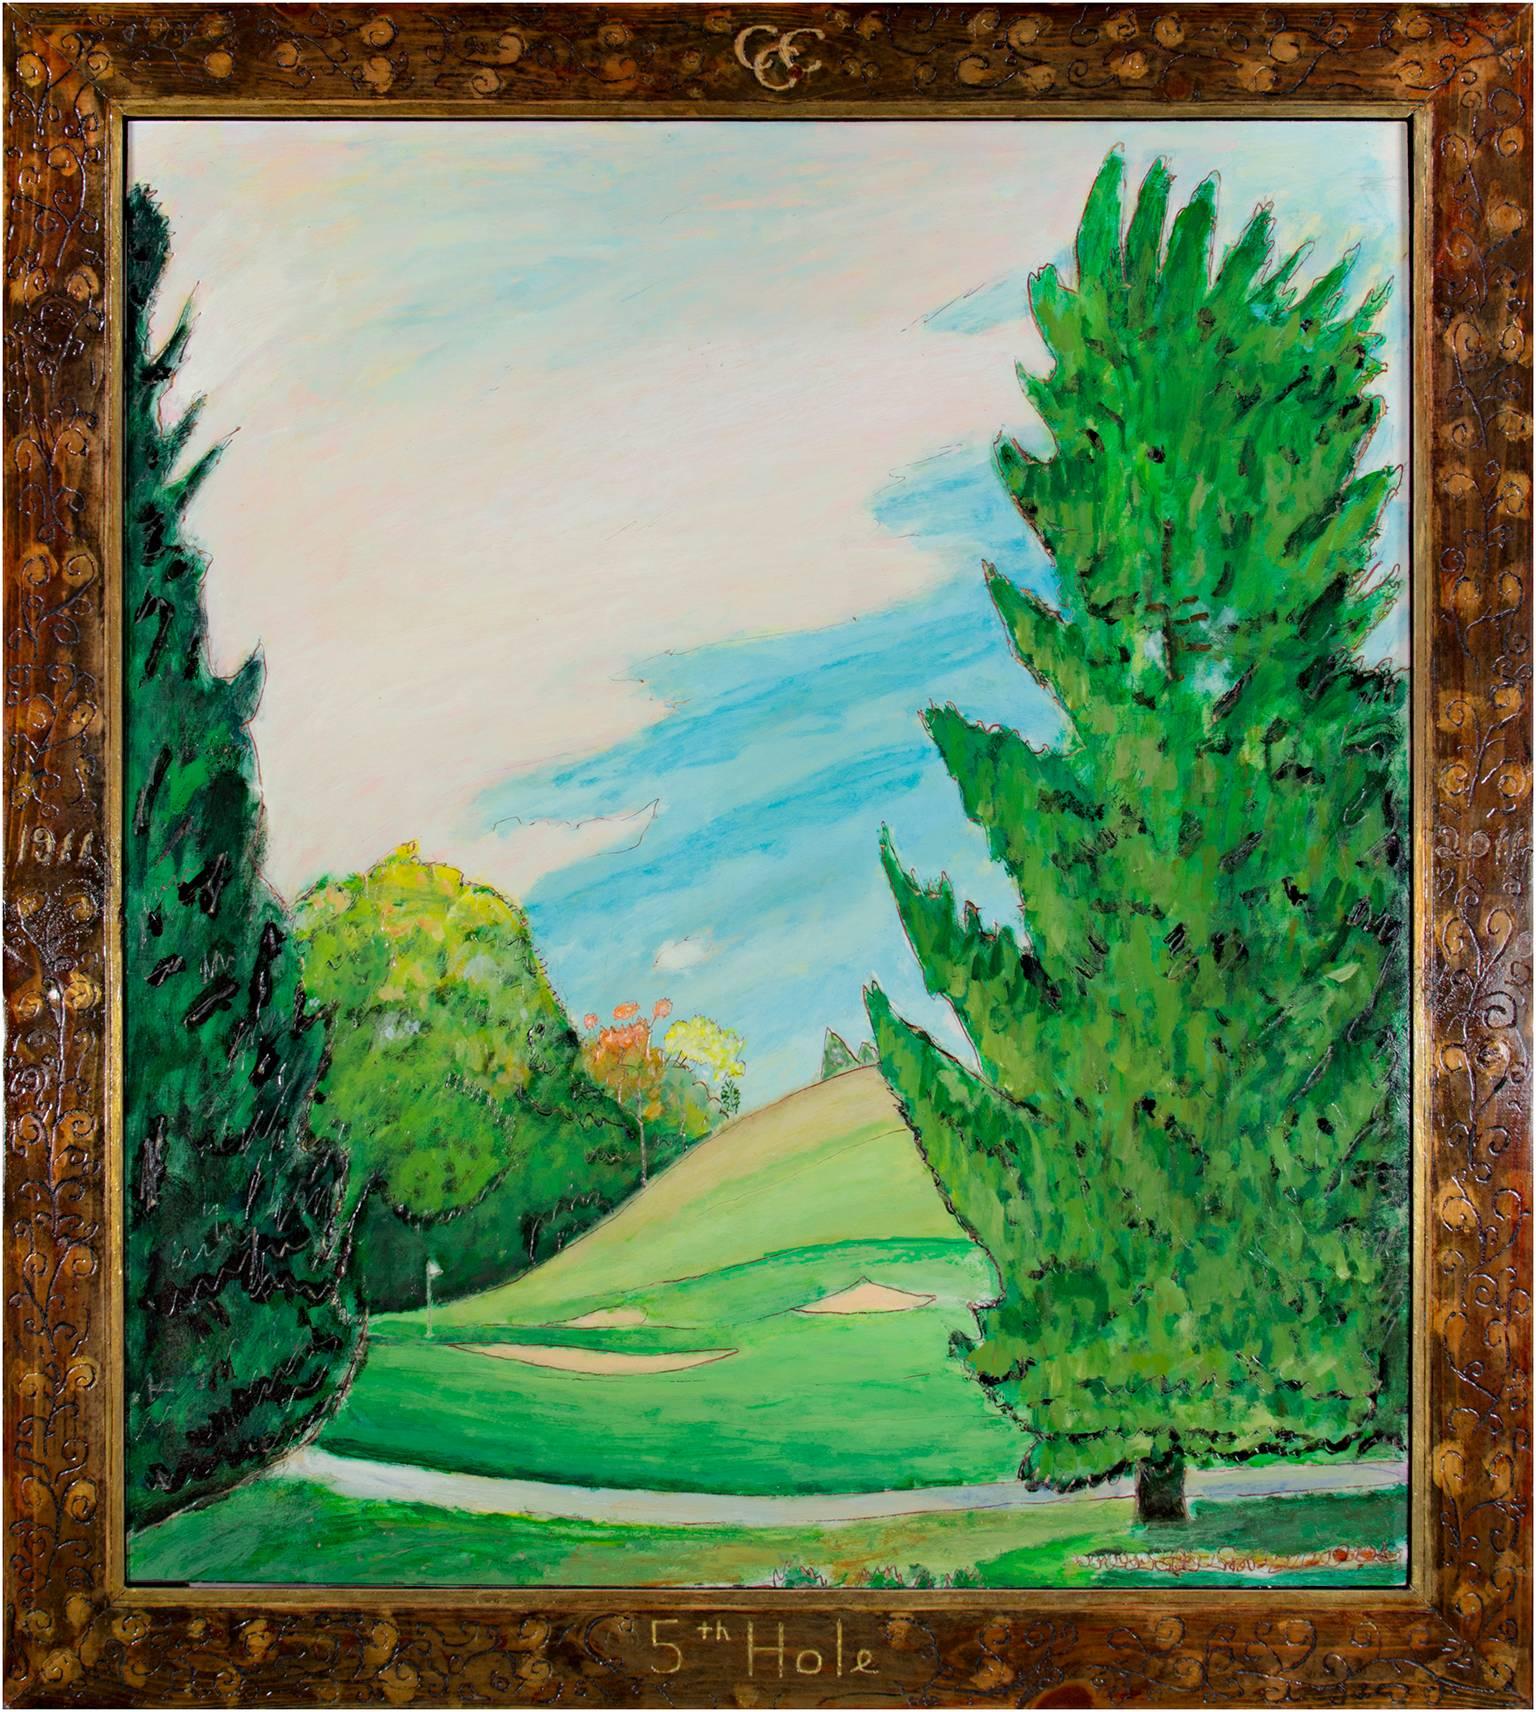 "Fifth Hole - Chenequa Country Club" is an original oil painting on wood by Robert Richter. The artist signed the painting on the back and created the hand-carved frame. This piece depicts a view of a golf course in Wisconsin. 

42" x 36" art
49